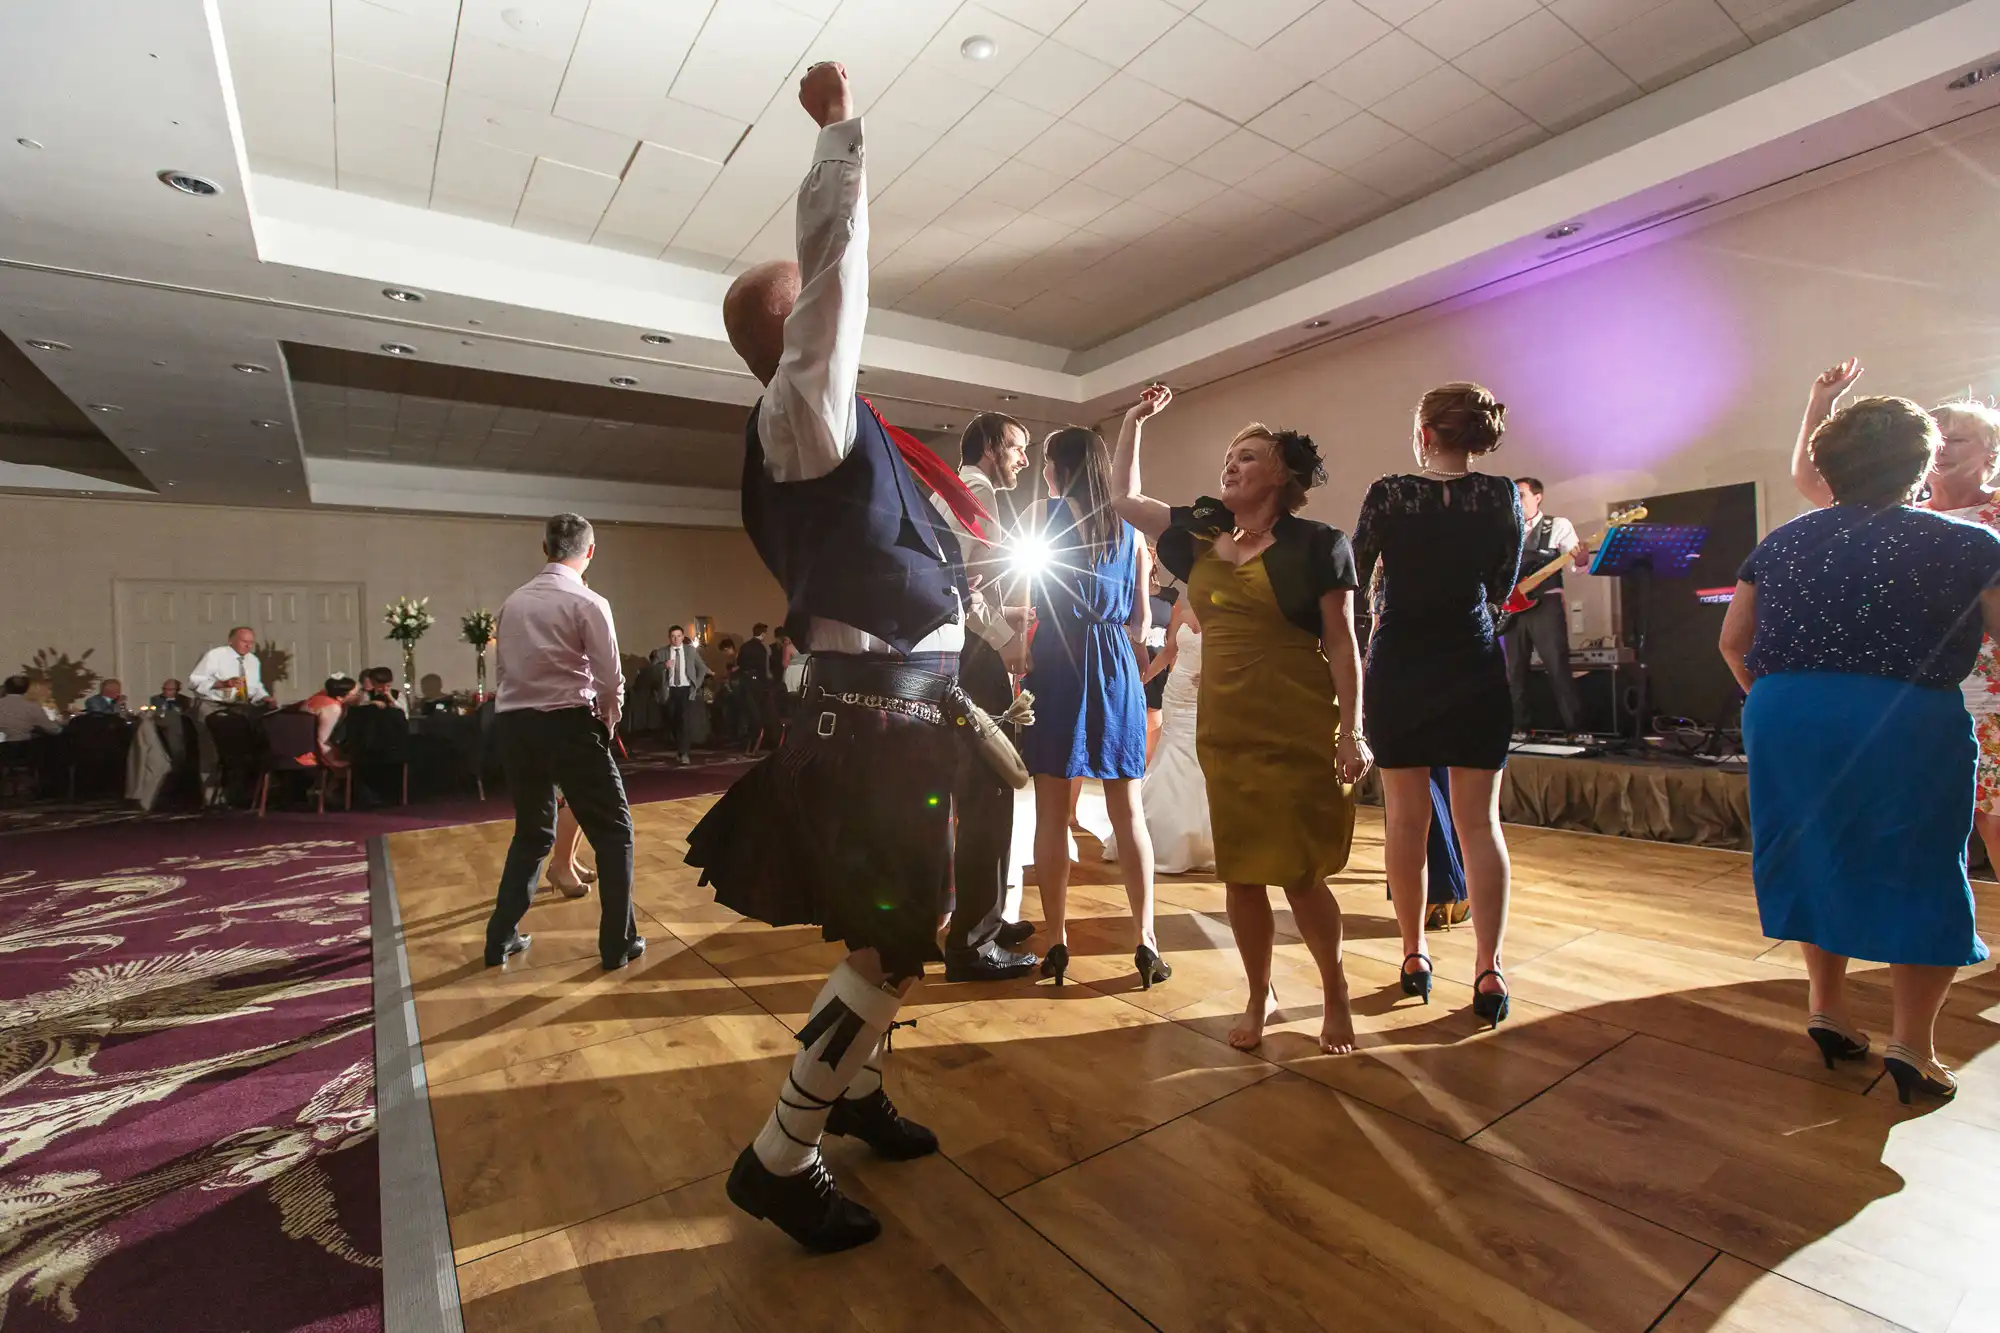 Guests dancing joyously at a wedding reception, with a man in a kilt raising his arm triumphantly under a bright light.